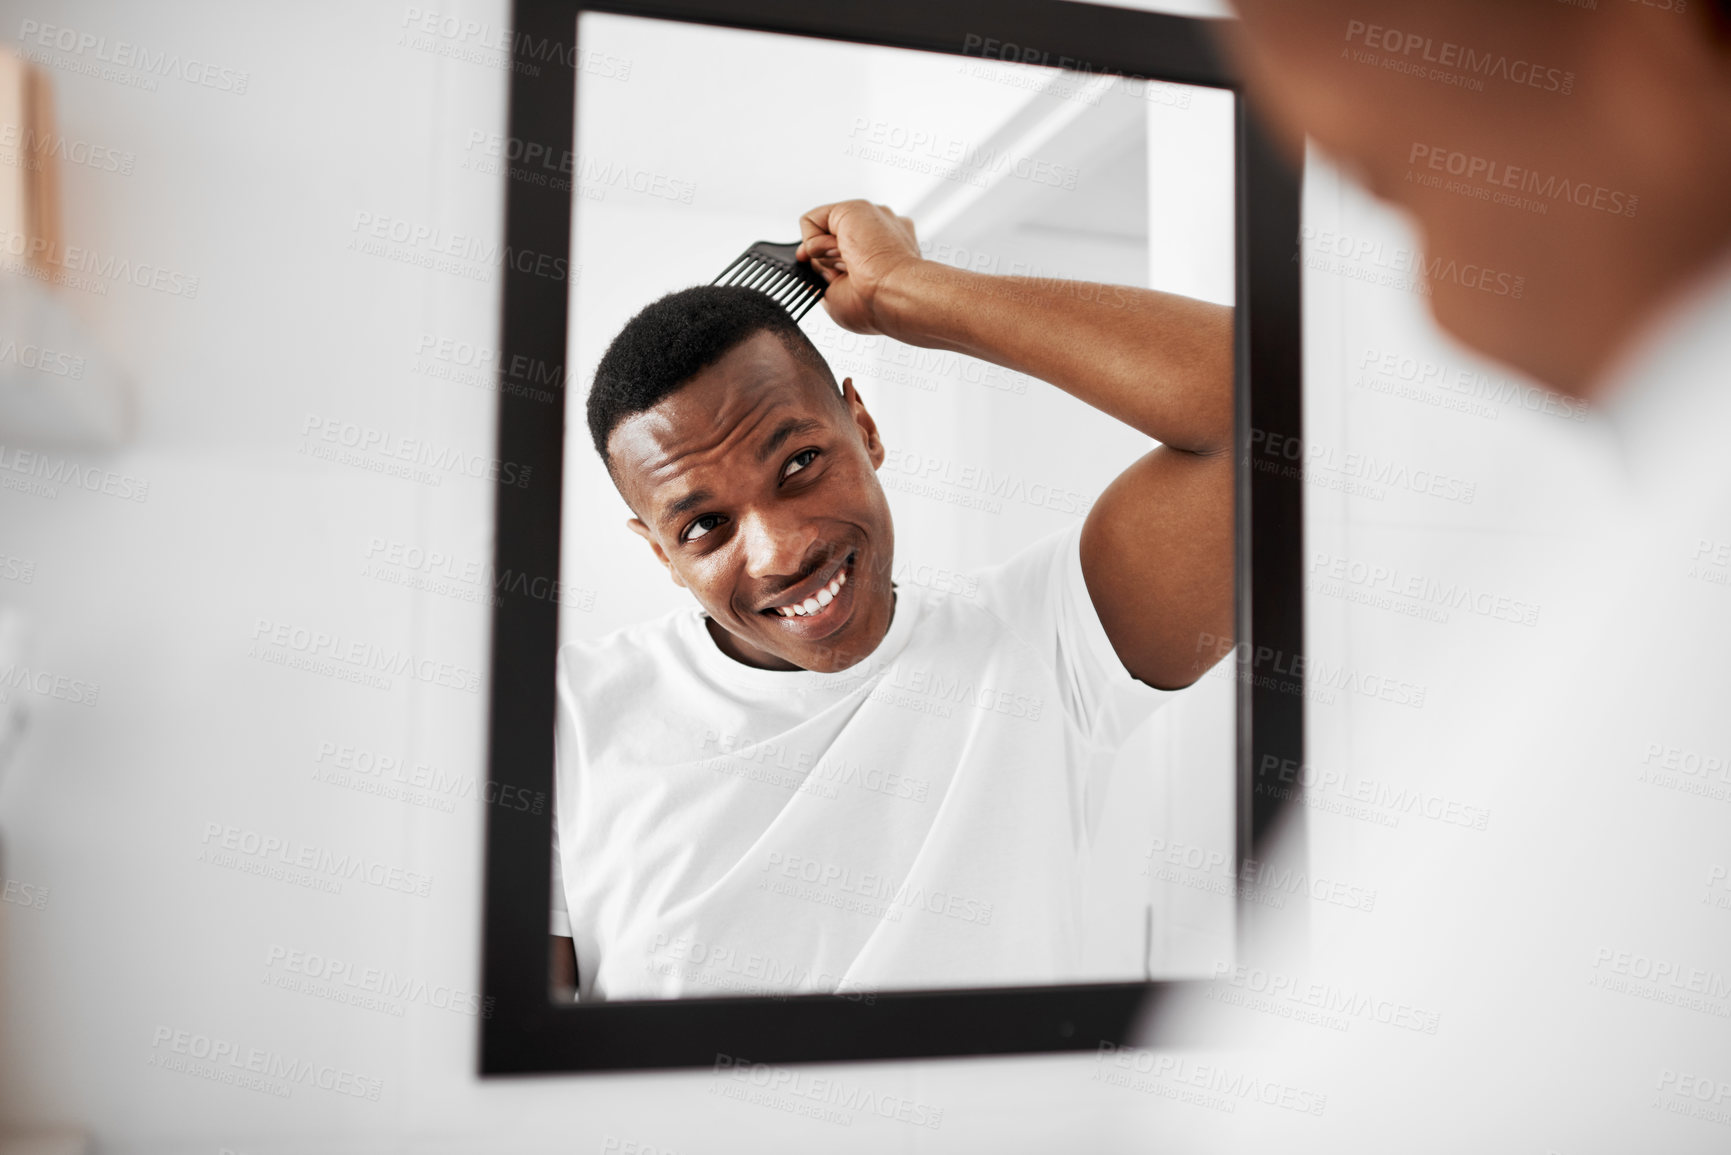 Buy stock photo Shot of a handsome young man combing his hair in the bathroom at home